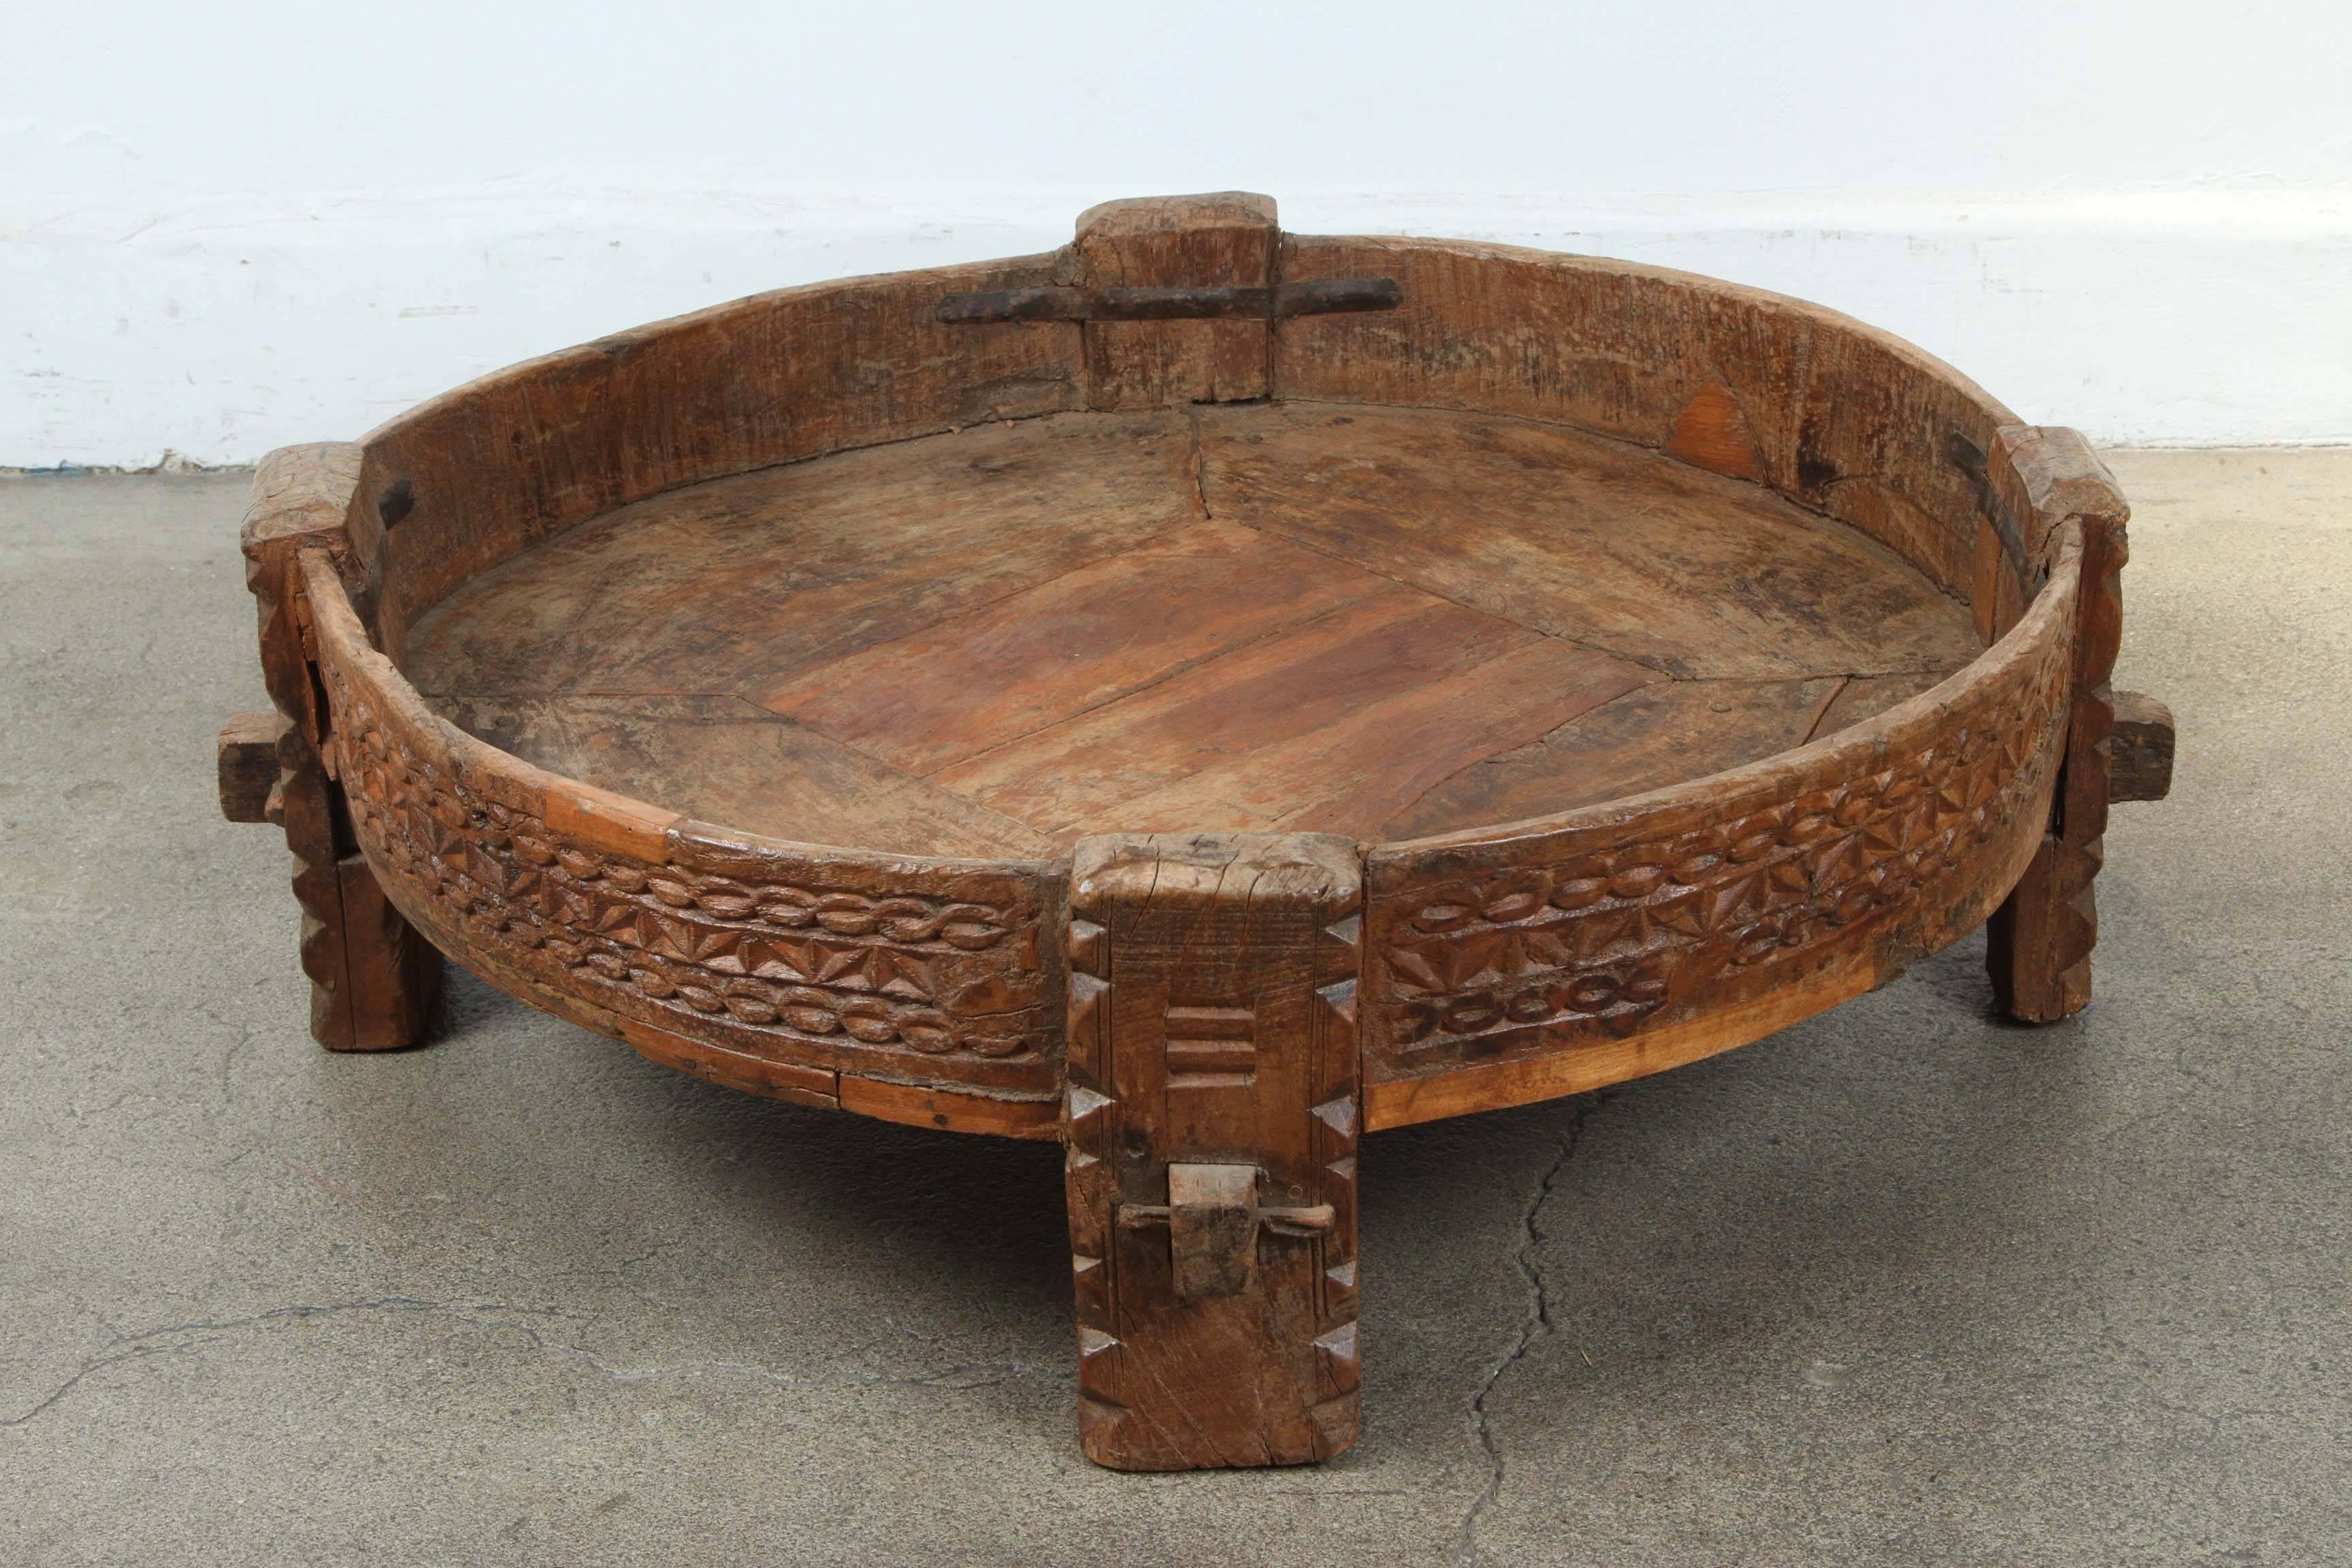 Great Moroccan round tribal table, made of wood and iron, hand-carved with geometric African design.
Handcrafted in North Africa by the Berber Tribes of Morocco.
Great to use indoor or outdoor. 
Great patina.